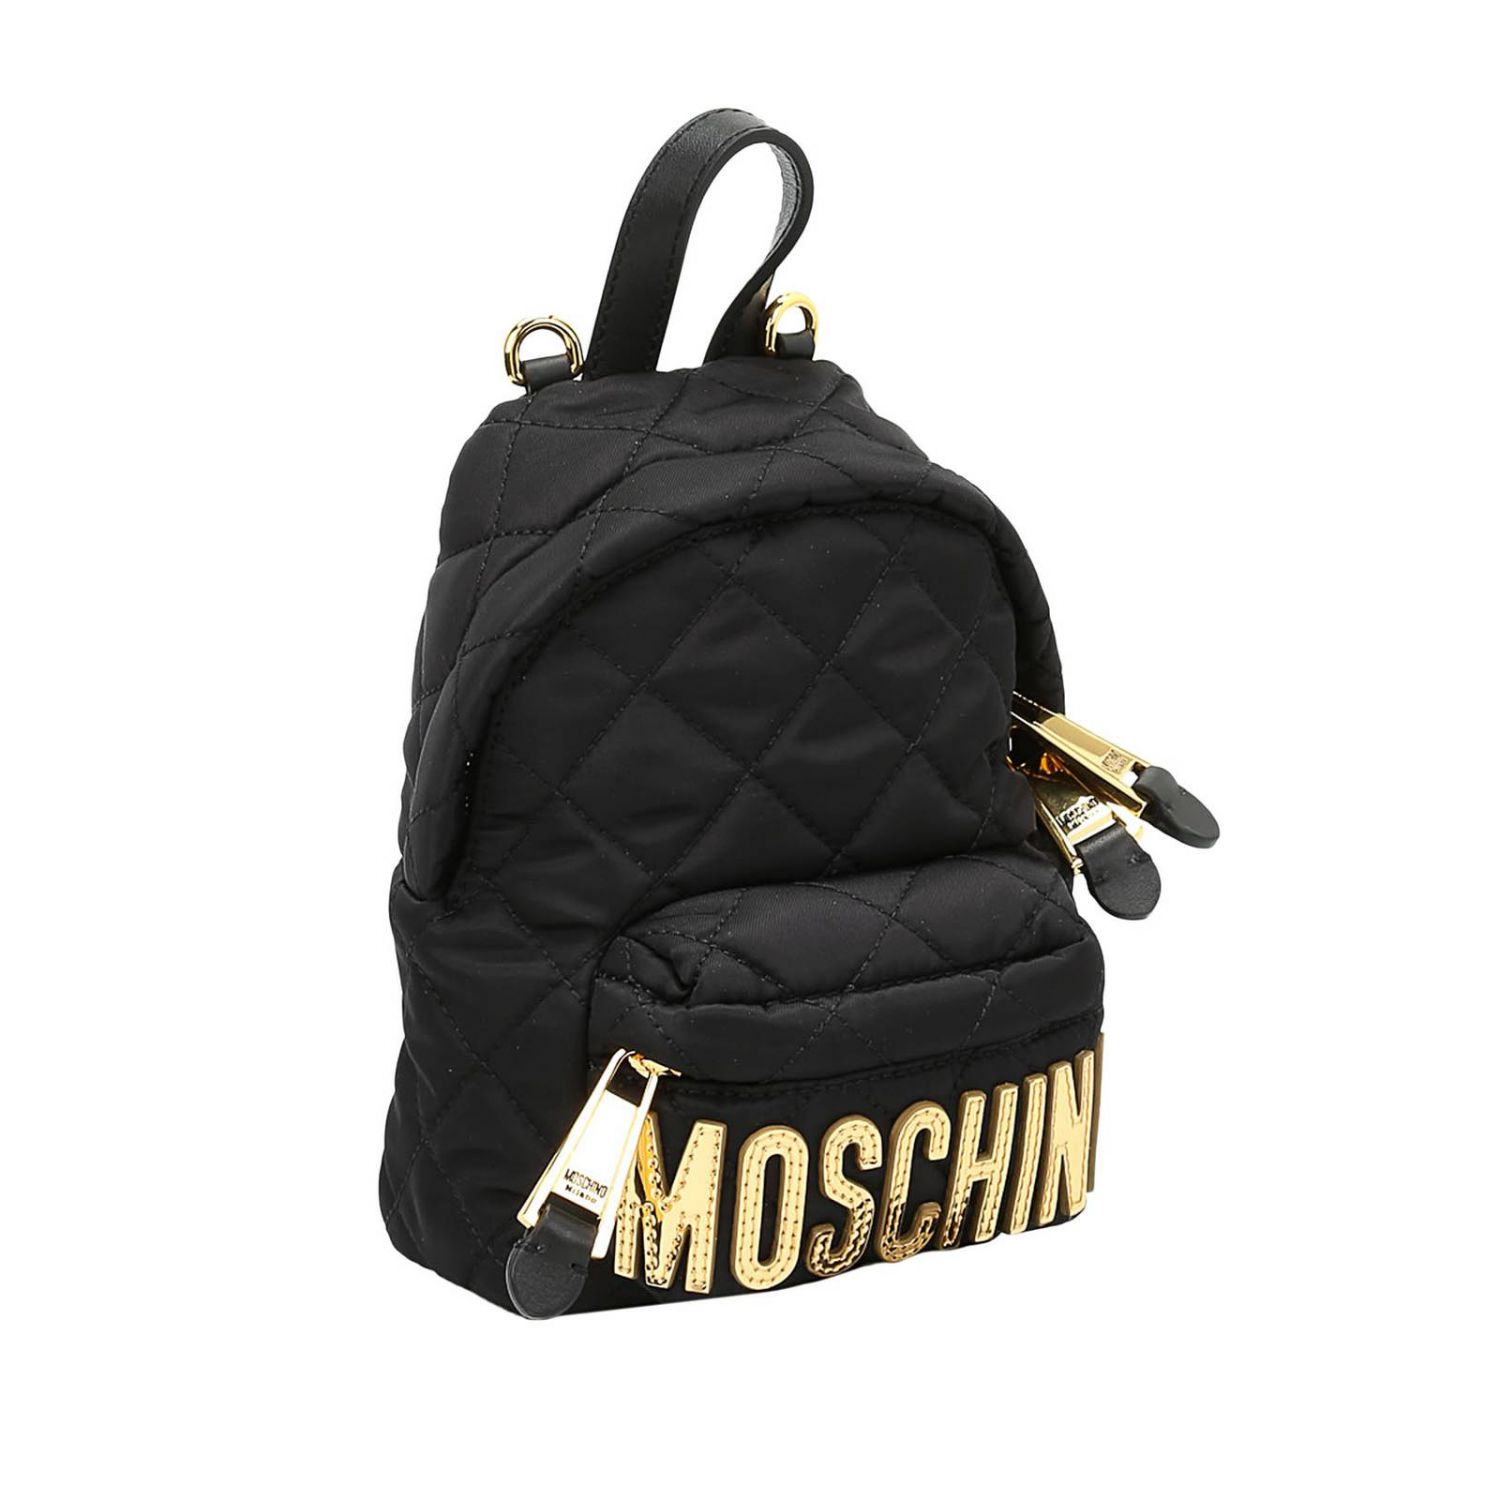 Moschino Outlet: Shoulder bag women - | Backpack Moschino B7609 8201 ...